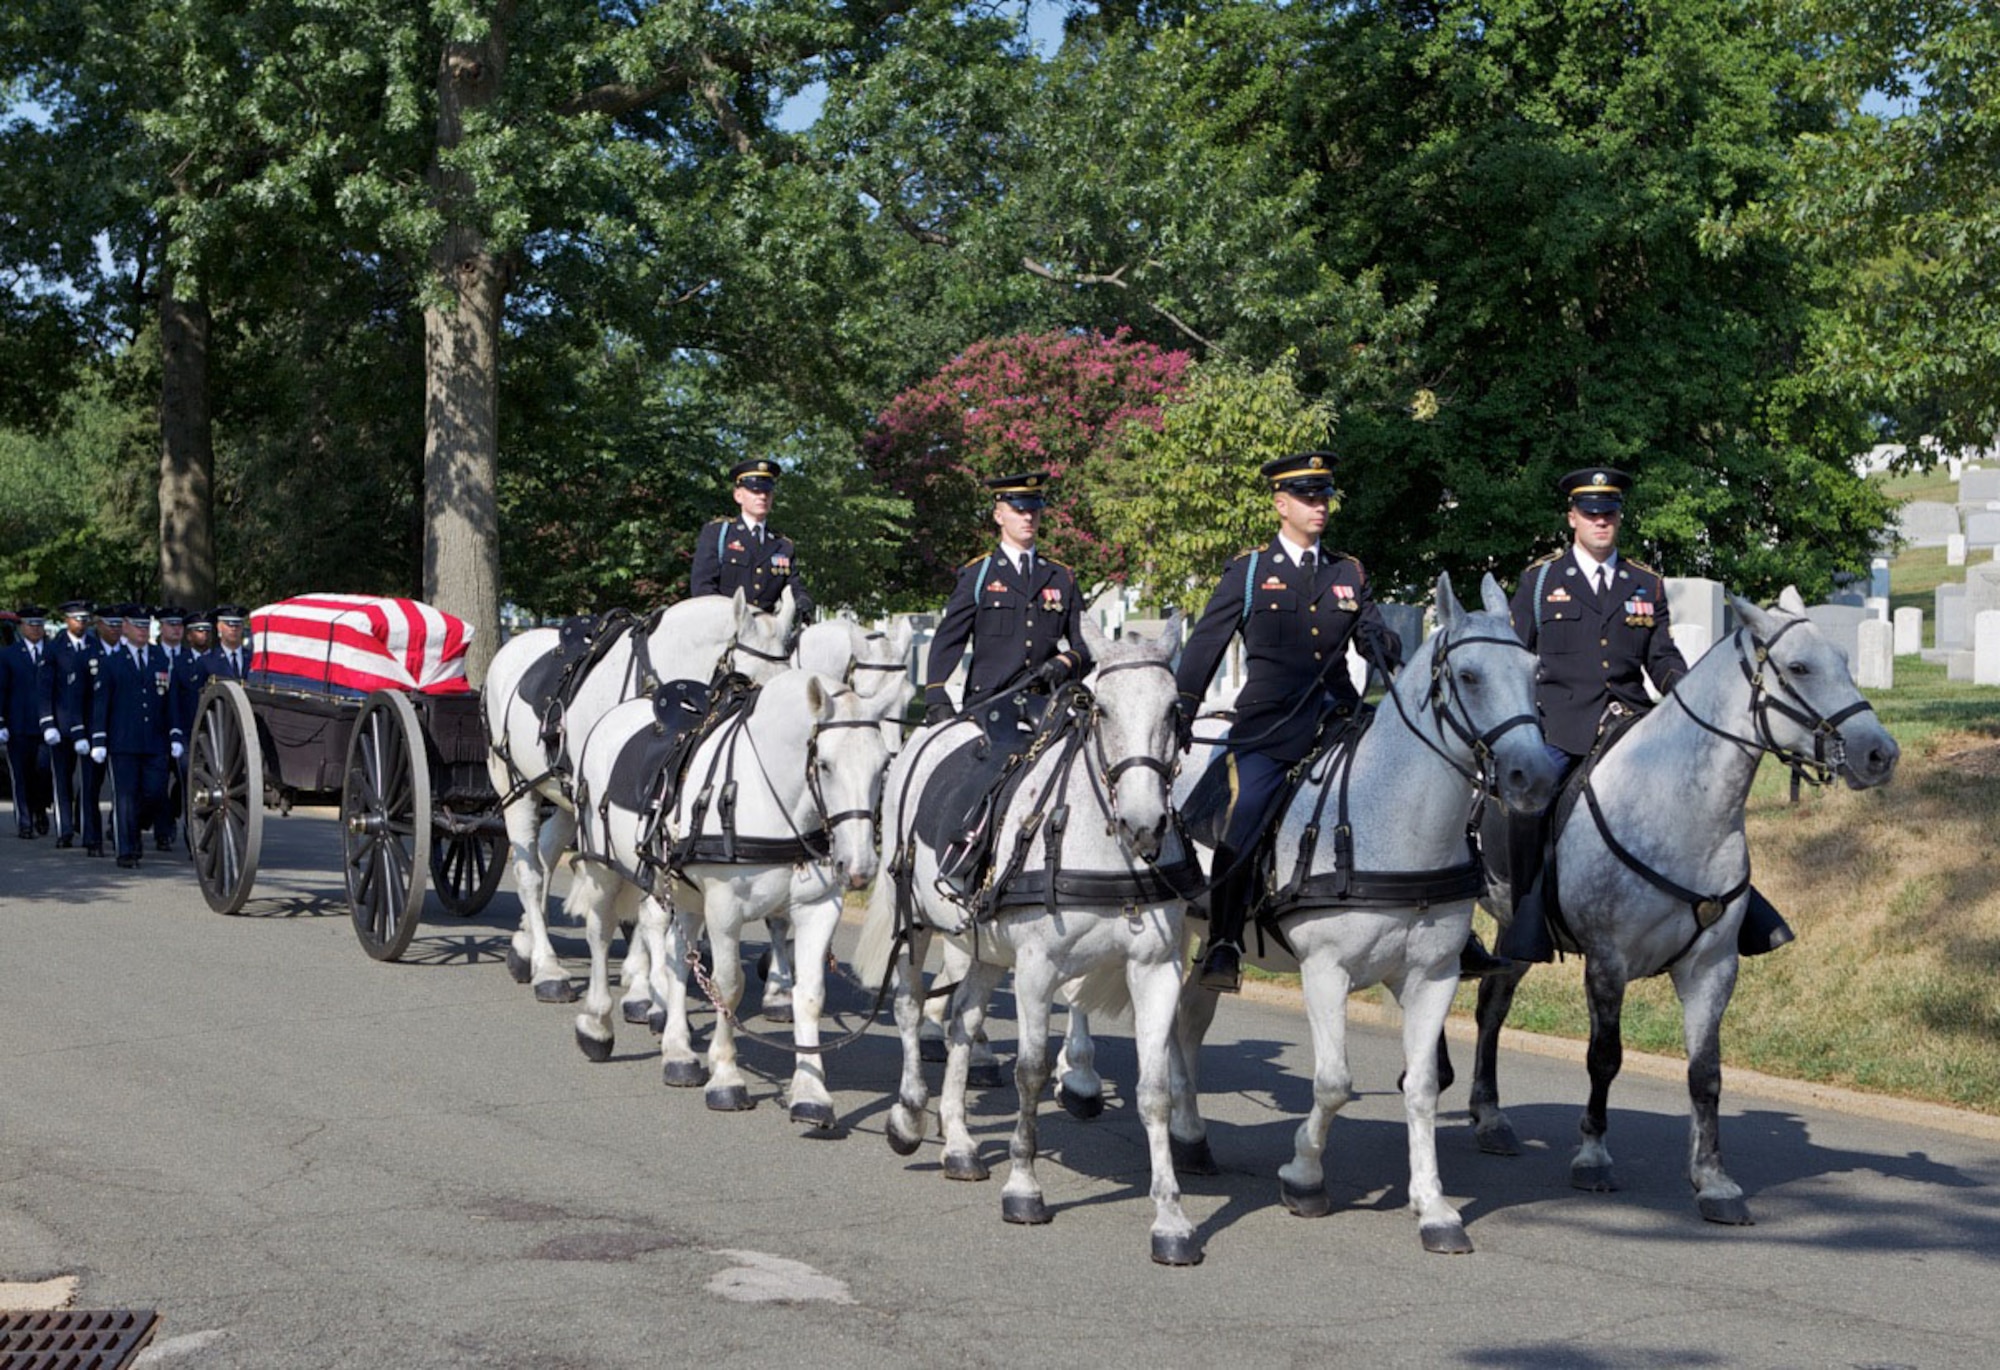 Soldiers from the U.S. Army’s Old Guard lead the horse-drawn caisson Aug. 12, 2011, carrying the casket of retired Col. John Carey to his final resting place in Arlington National Cemetery.  Following the caisson were members of the Air Force Honor Guard and Ceremonial Brass Band, and his family, friends and fellow Airmen who came to pay their final respects.  (Courtesy photo/Jerry Hughes)